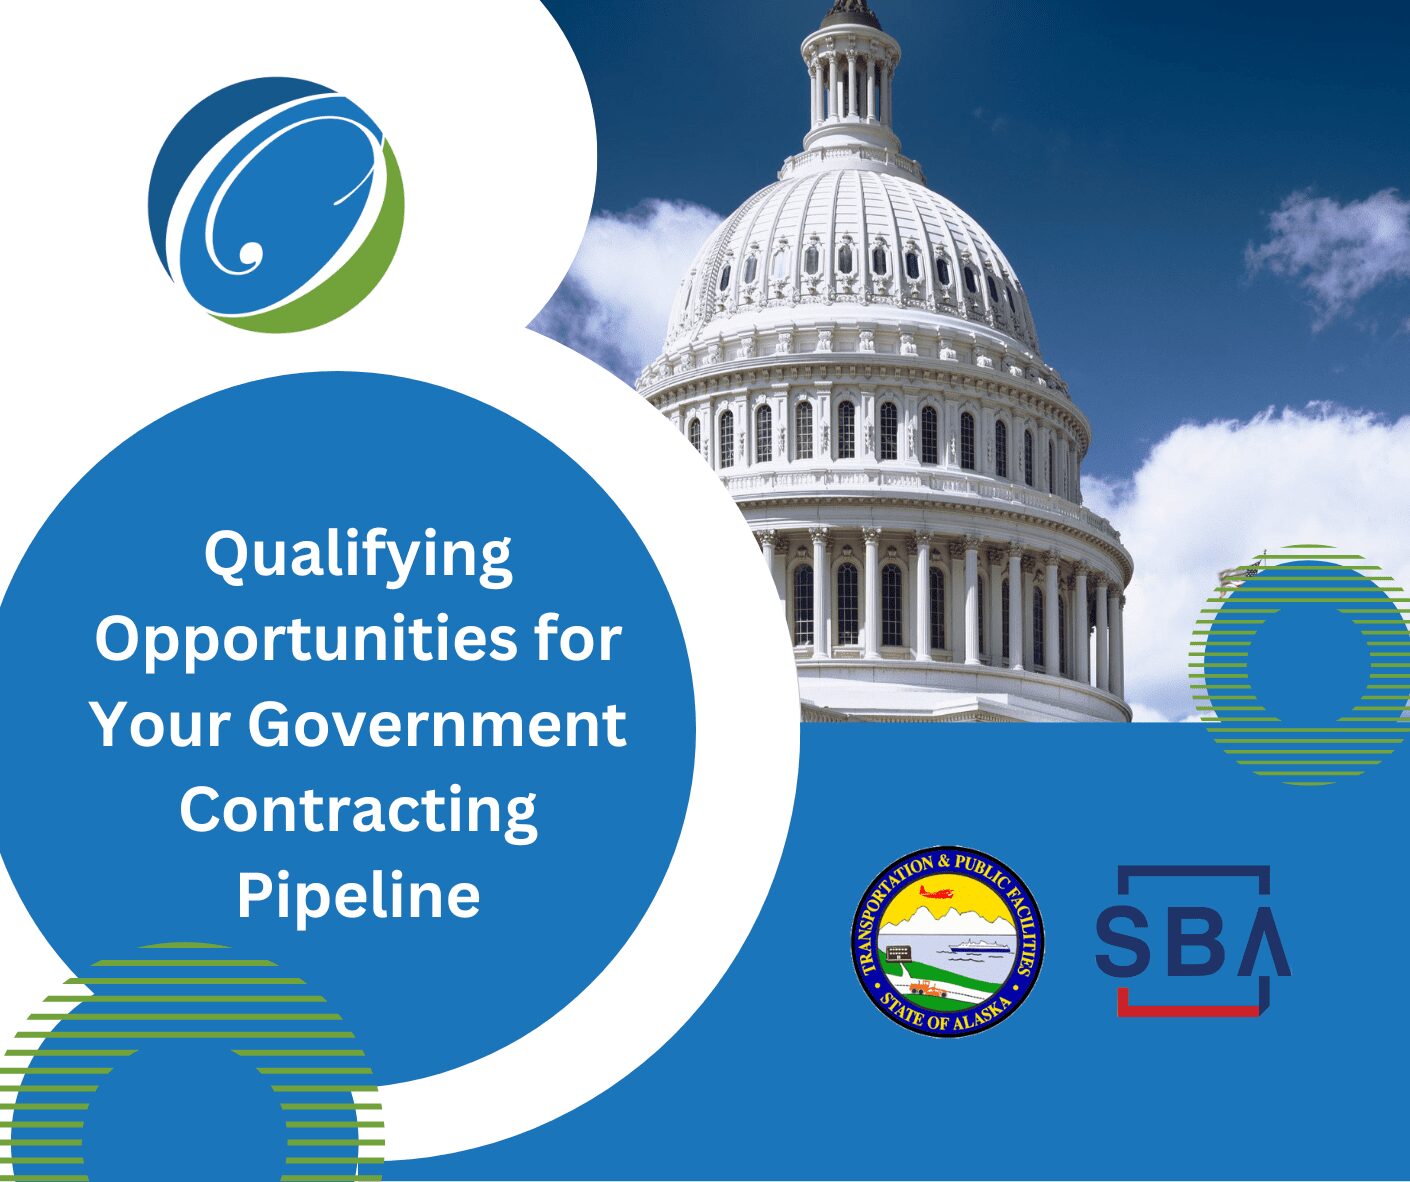 Qualifying Opportunities for Your Government Contracting Pipeline